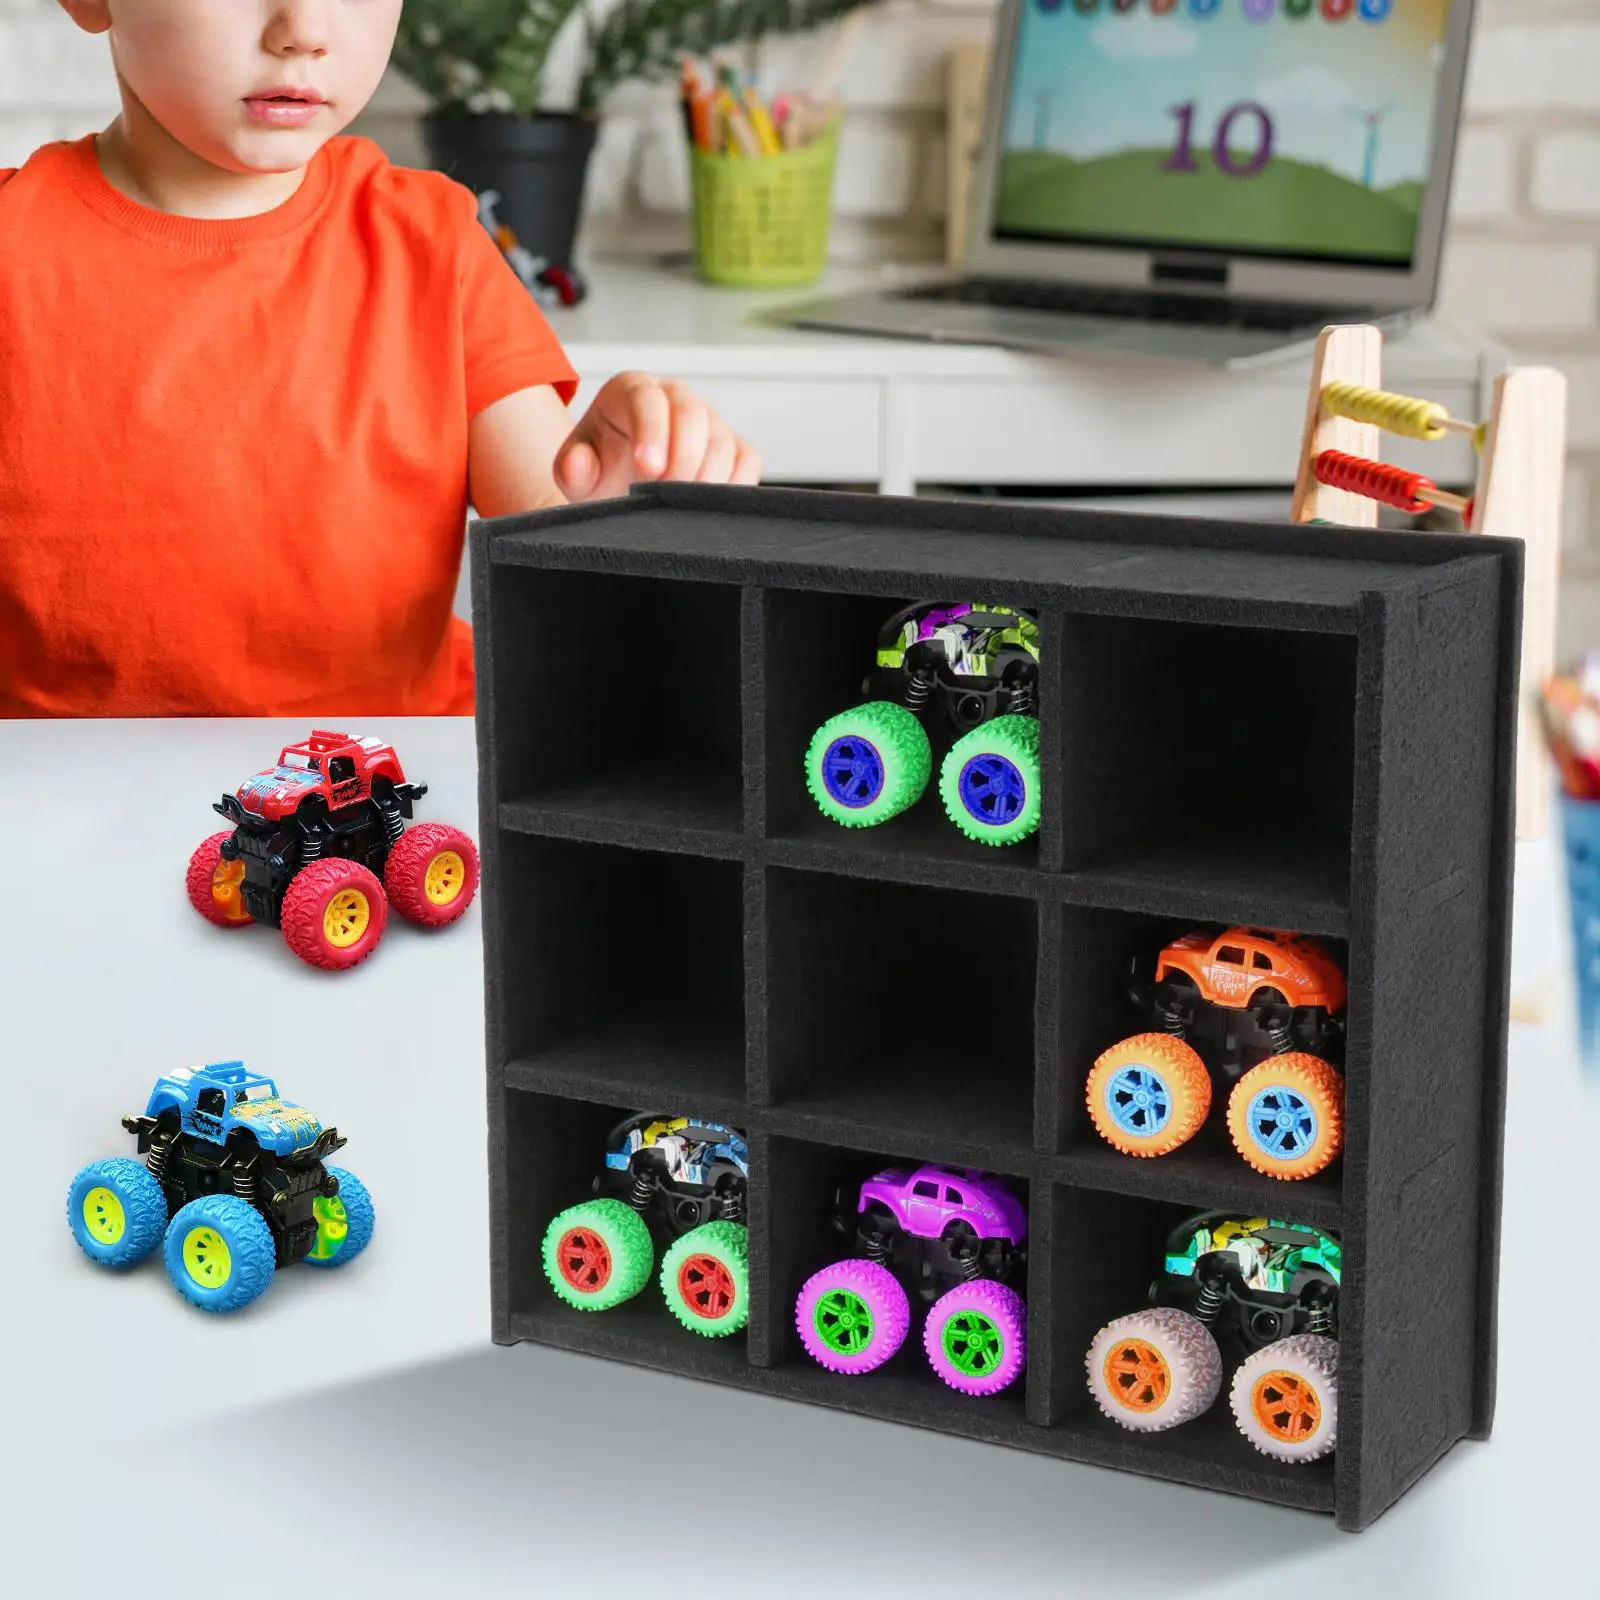 1:64 Scale Toy Trucks Door Wall Mounted Storage Case Black Color Felt Material